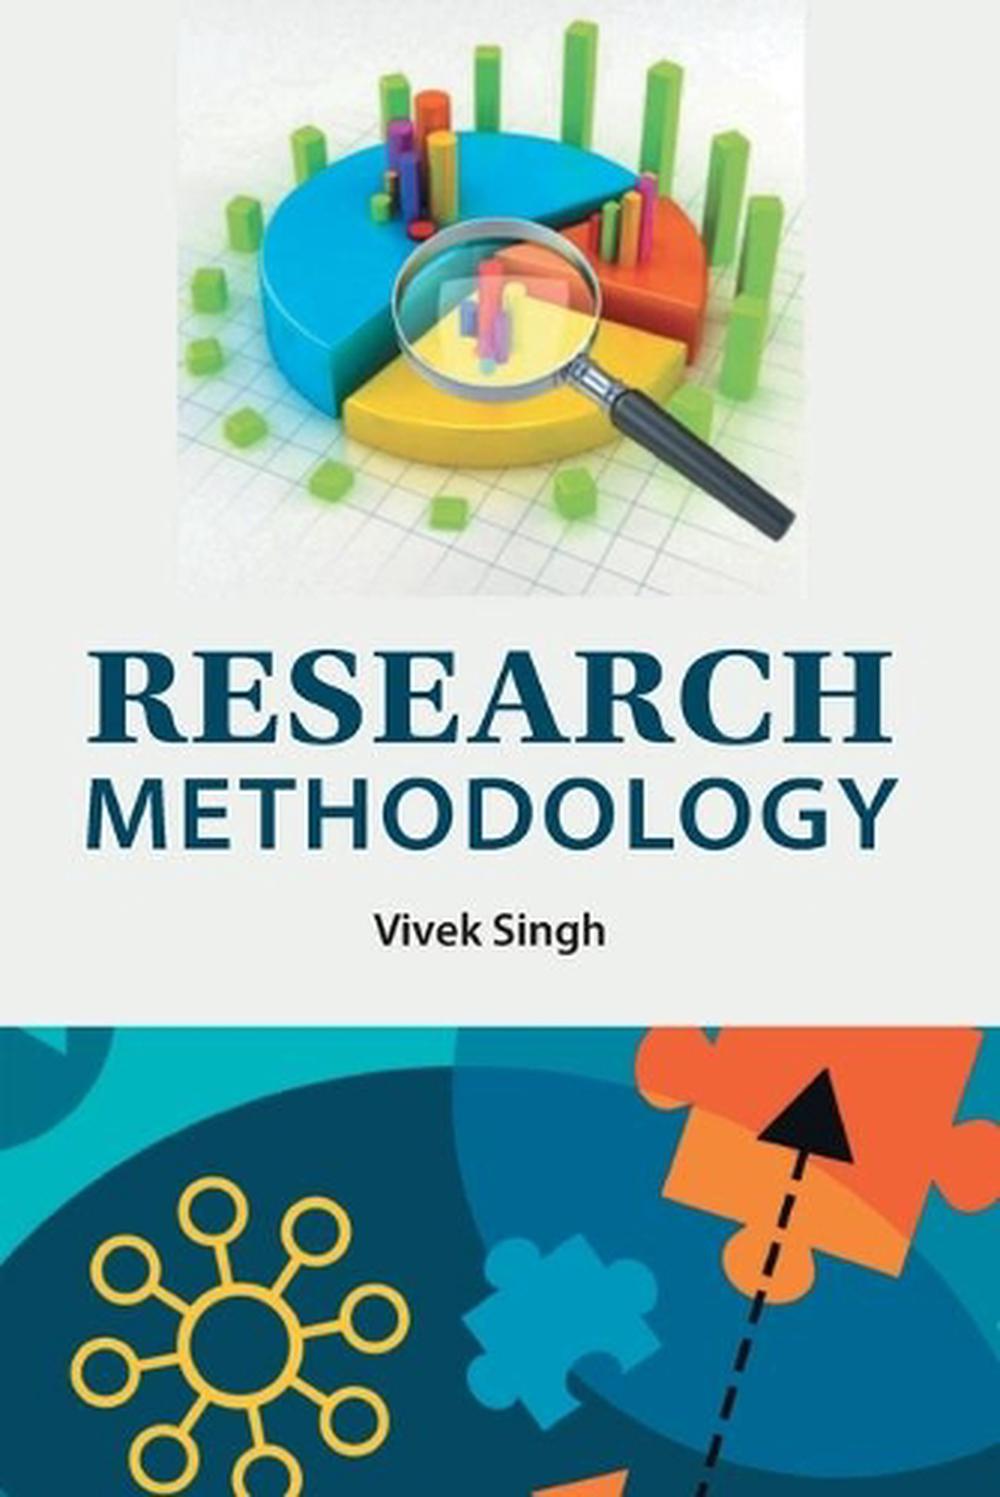 textbook on research methodology